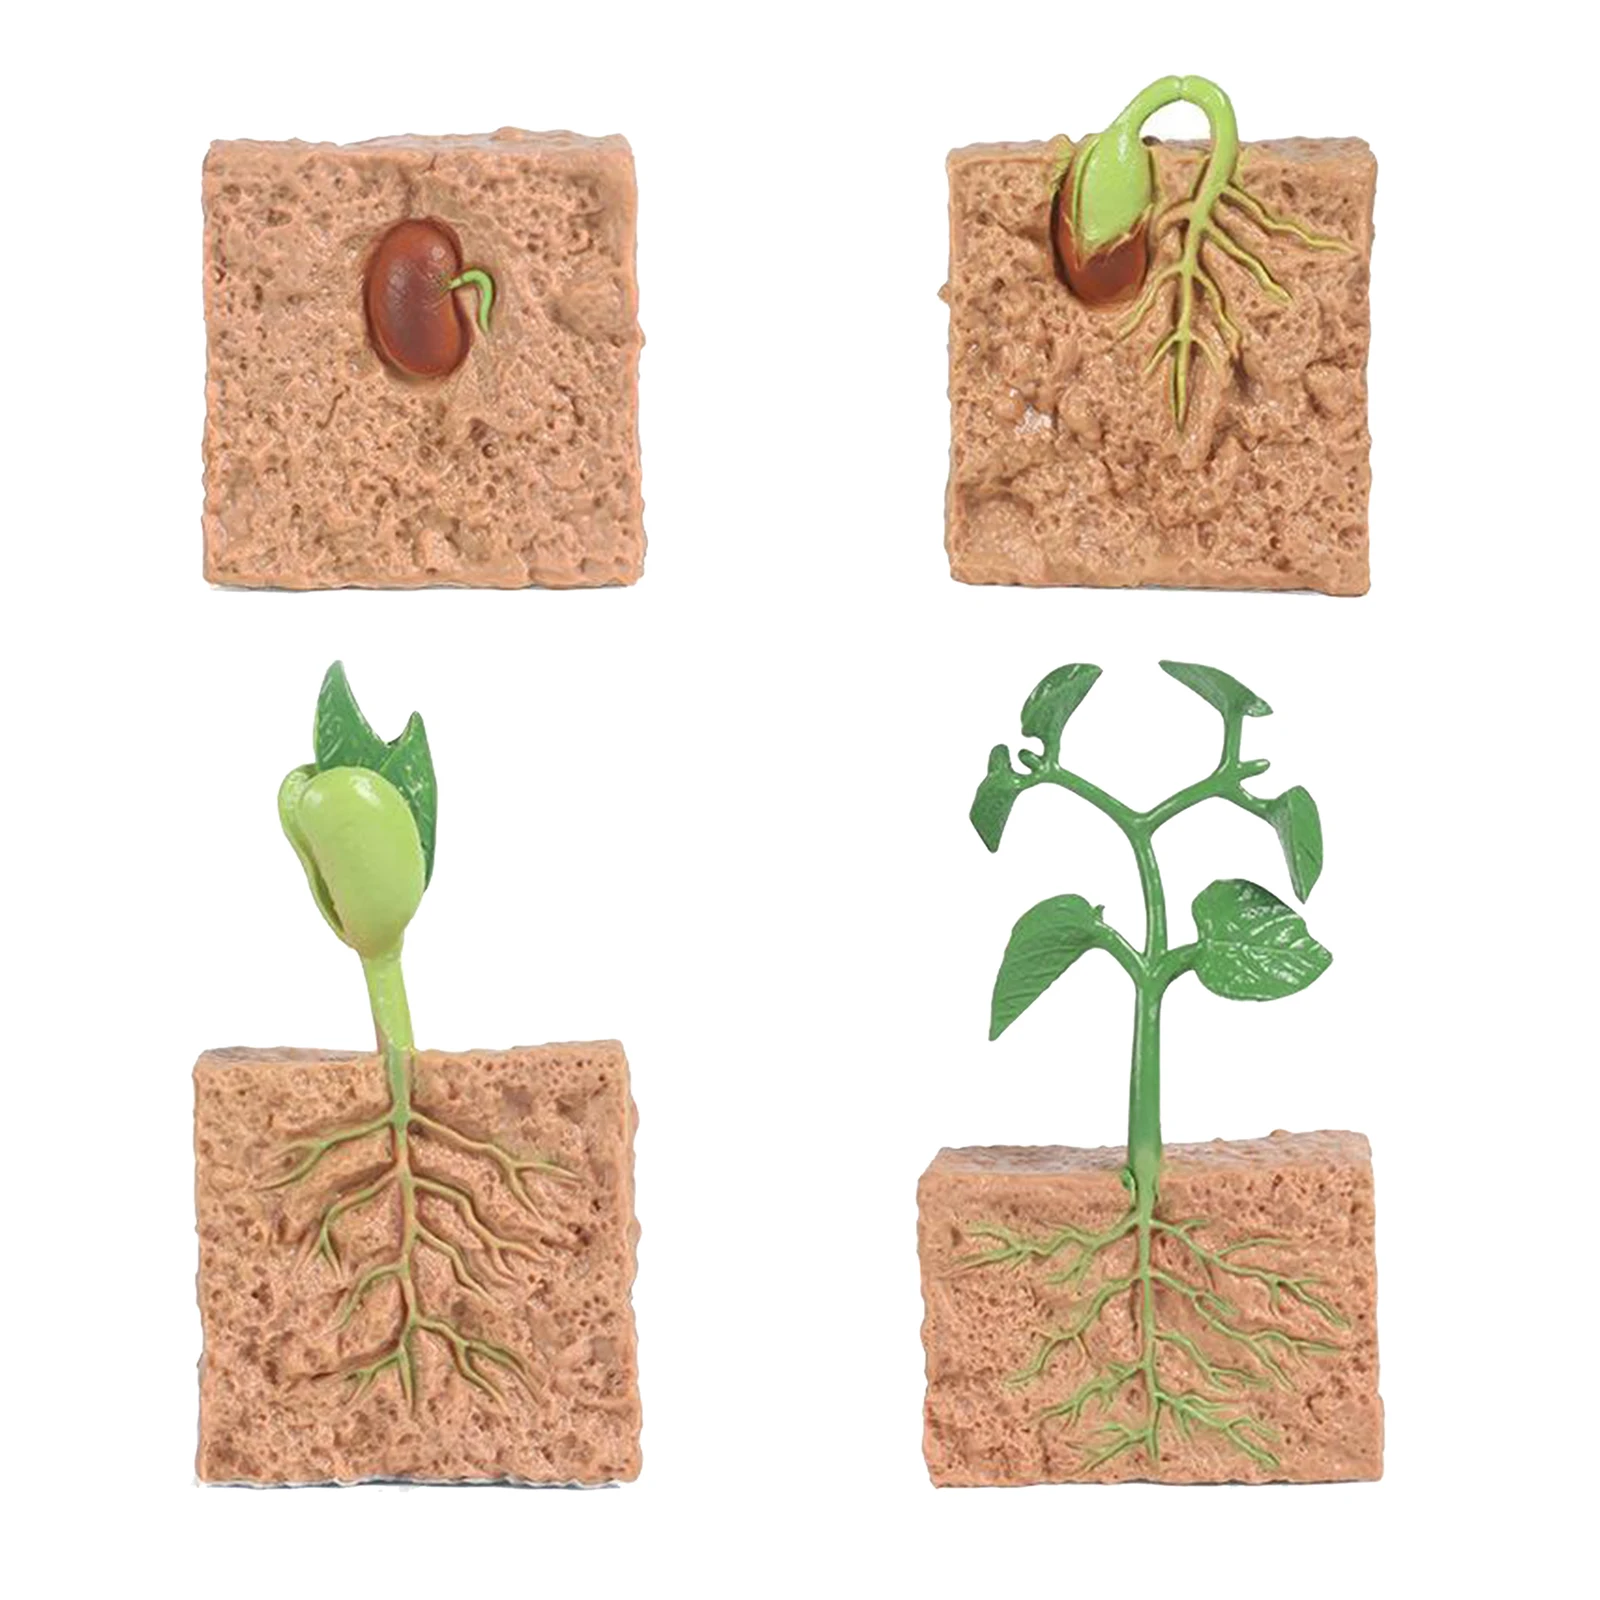 Kids Plant Soybeans Seeds Growth Life Cycle Model Biology Toys Child Education 